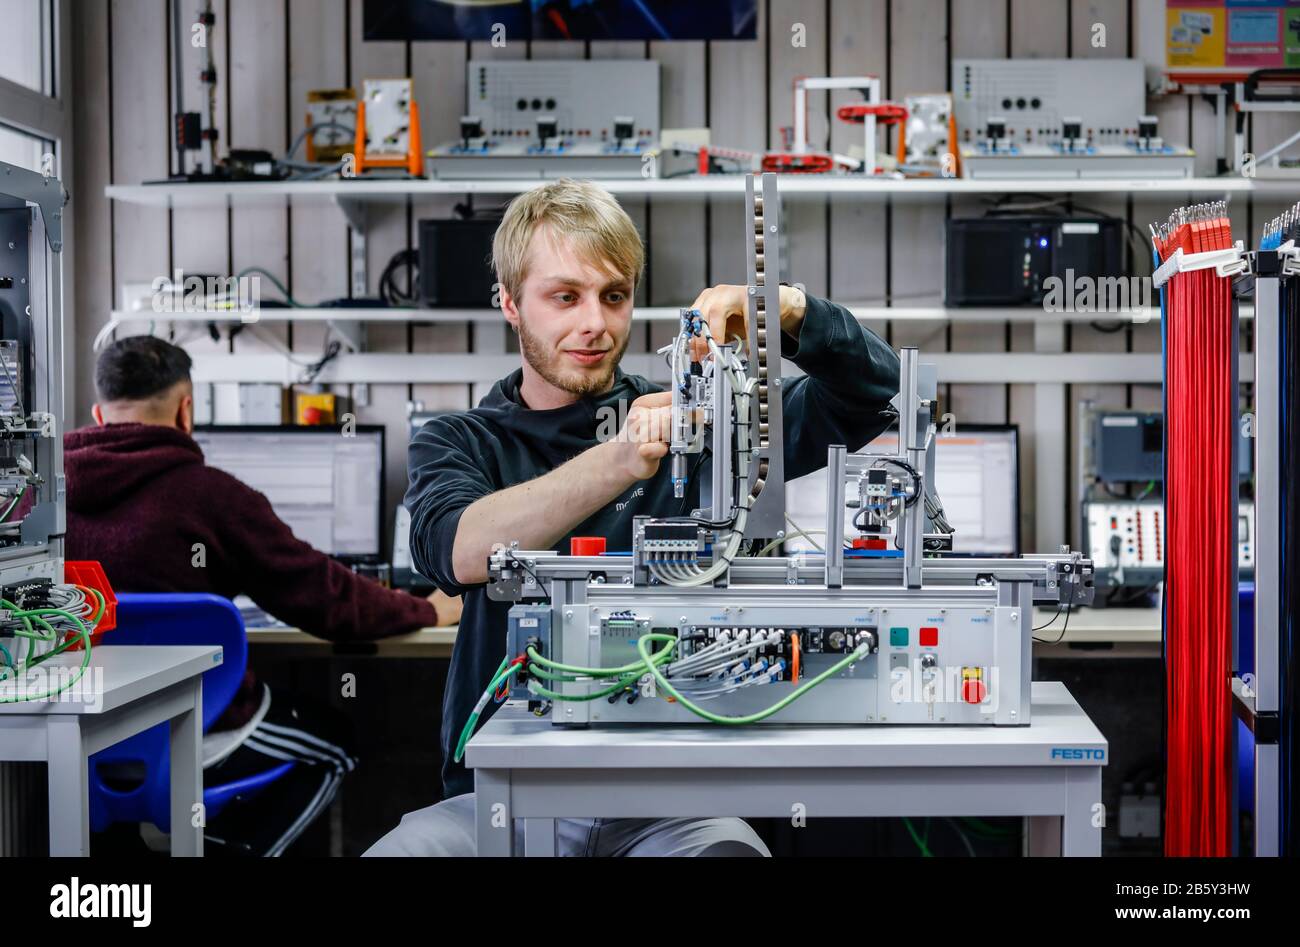 Remscheid, North Rhine-Westphalia, Germany - Trainees in metal and electrical professions, an industrial mechanic assembles an electro-pneumatic syste Stock Photo